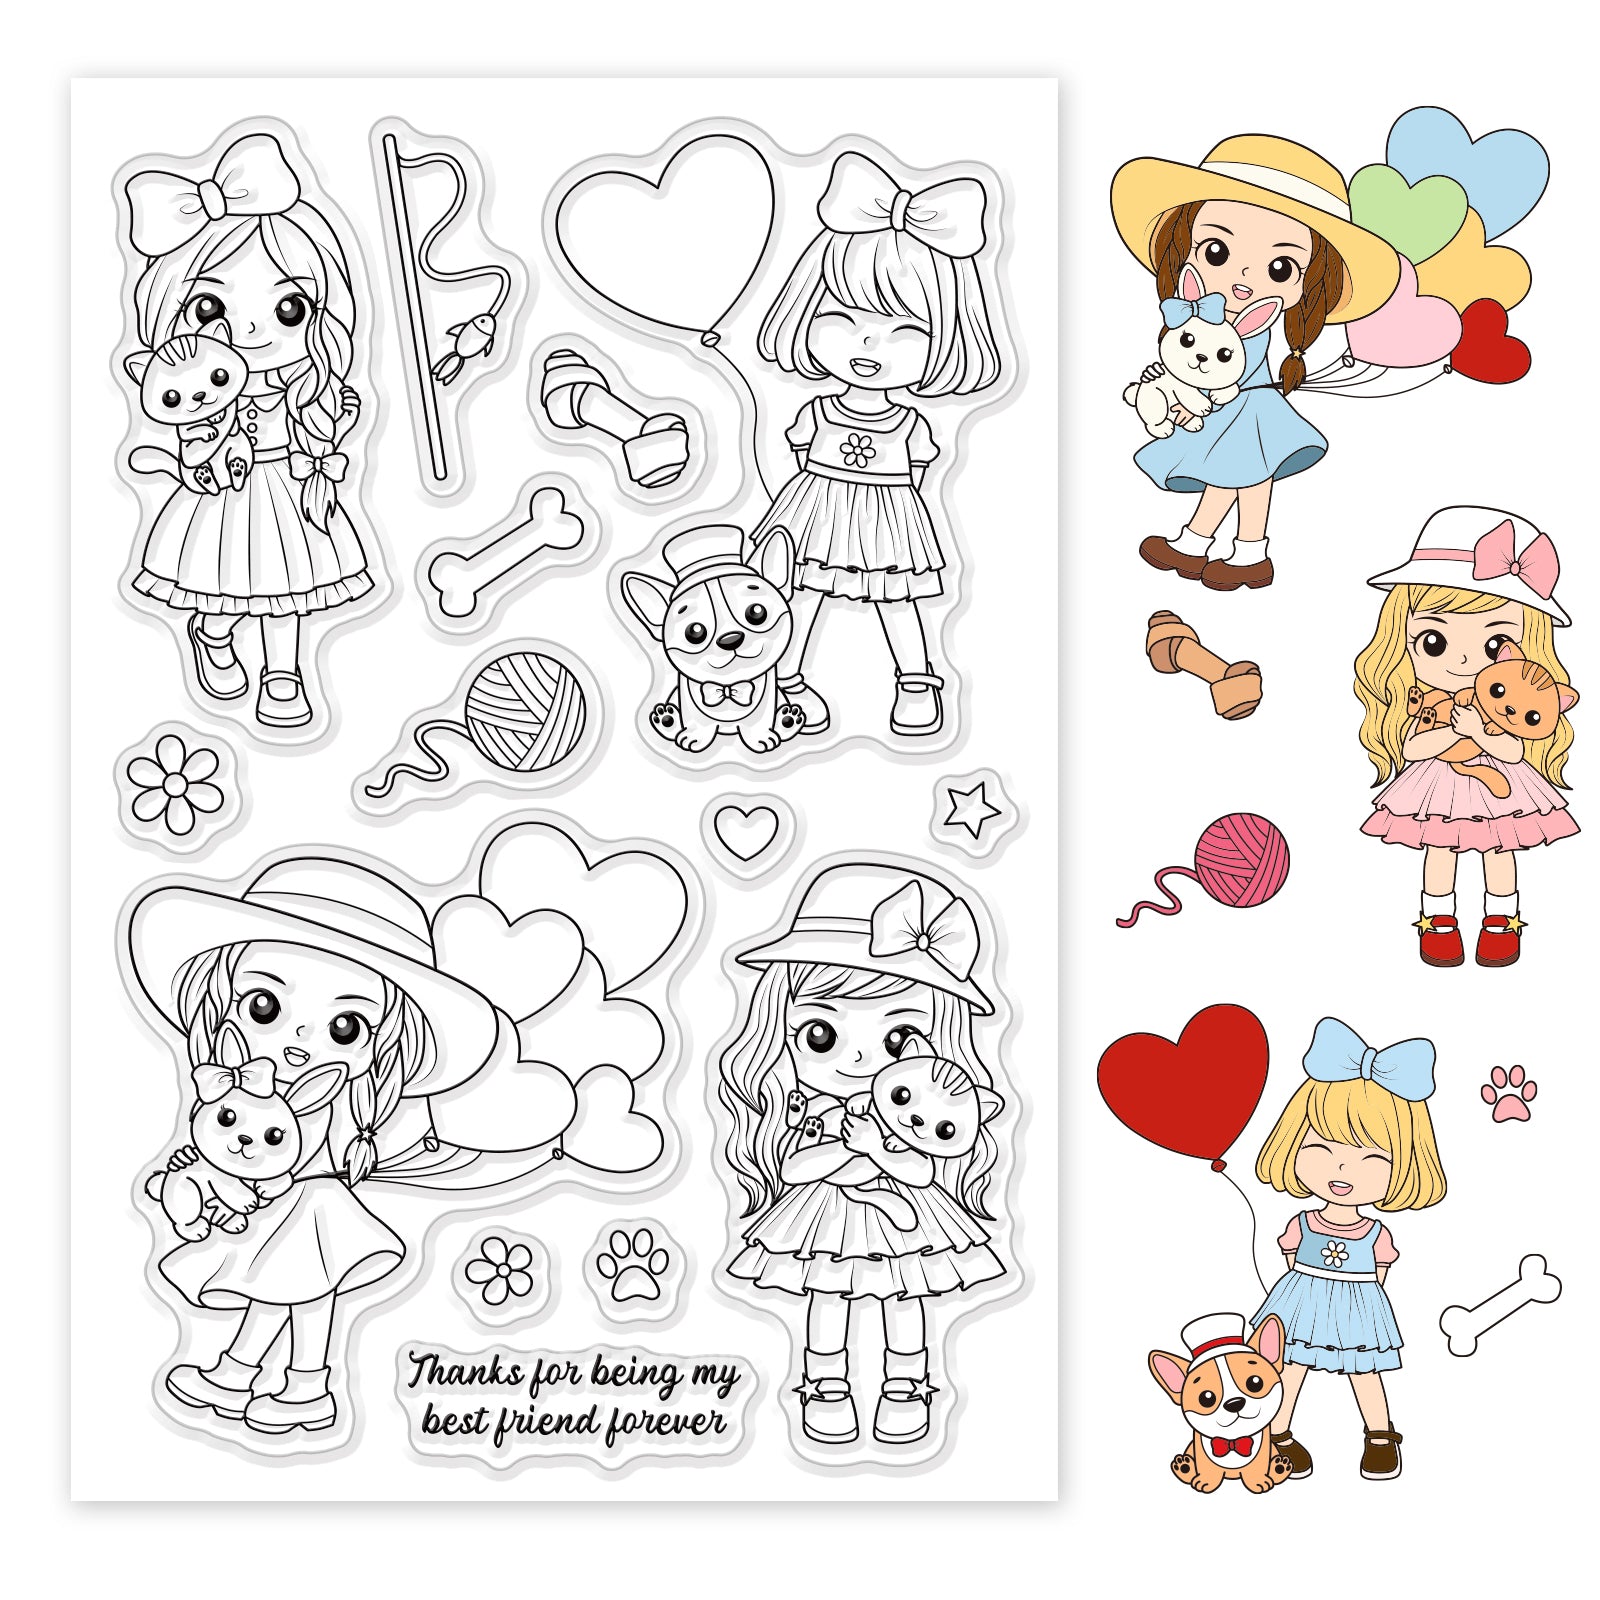 Globleland Animal, Girl, Friend, Cat, Dog, Rabbit Stamp Clear Silicone Stamp Seal for Card Making Decoration and DIY Scrapbooking